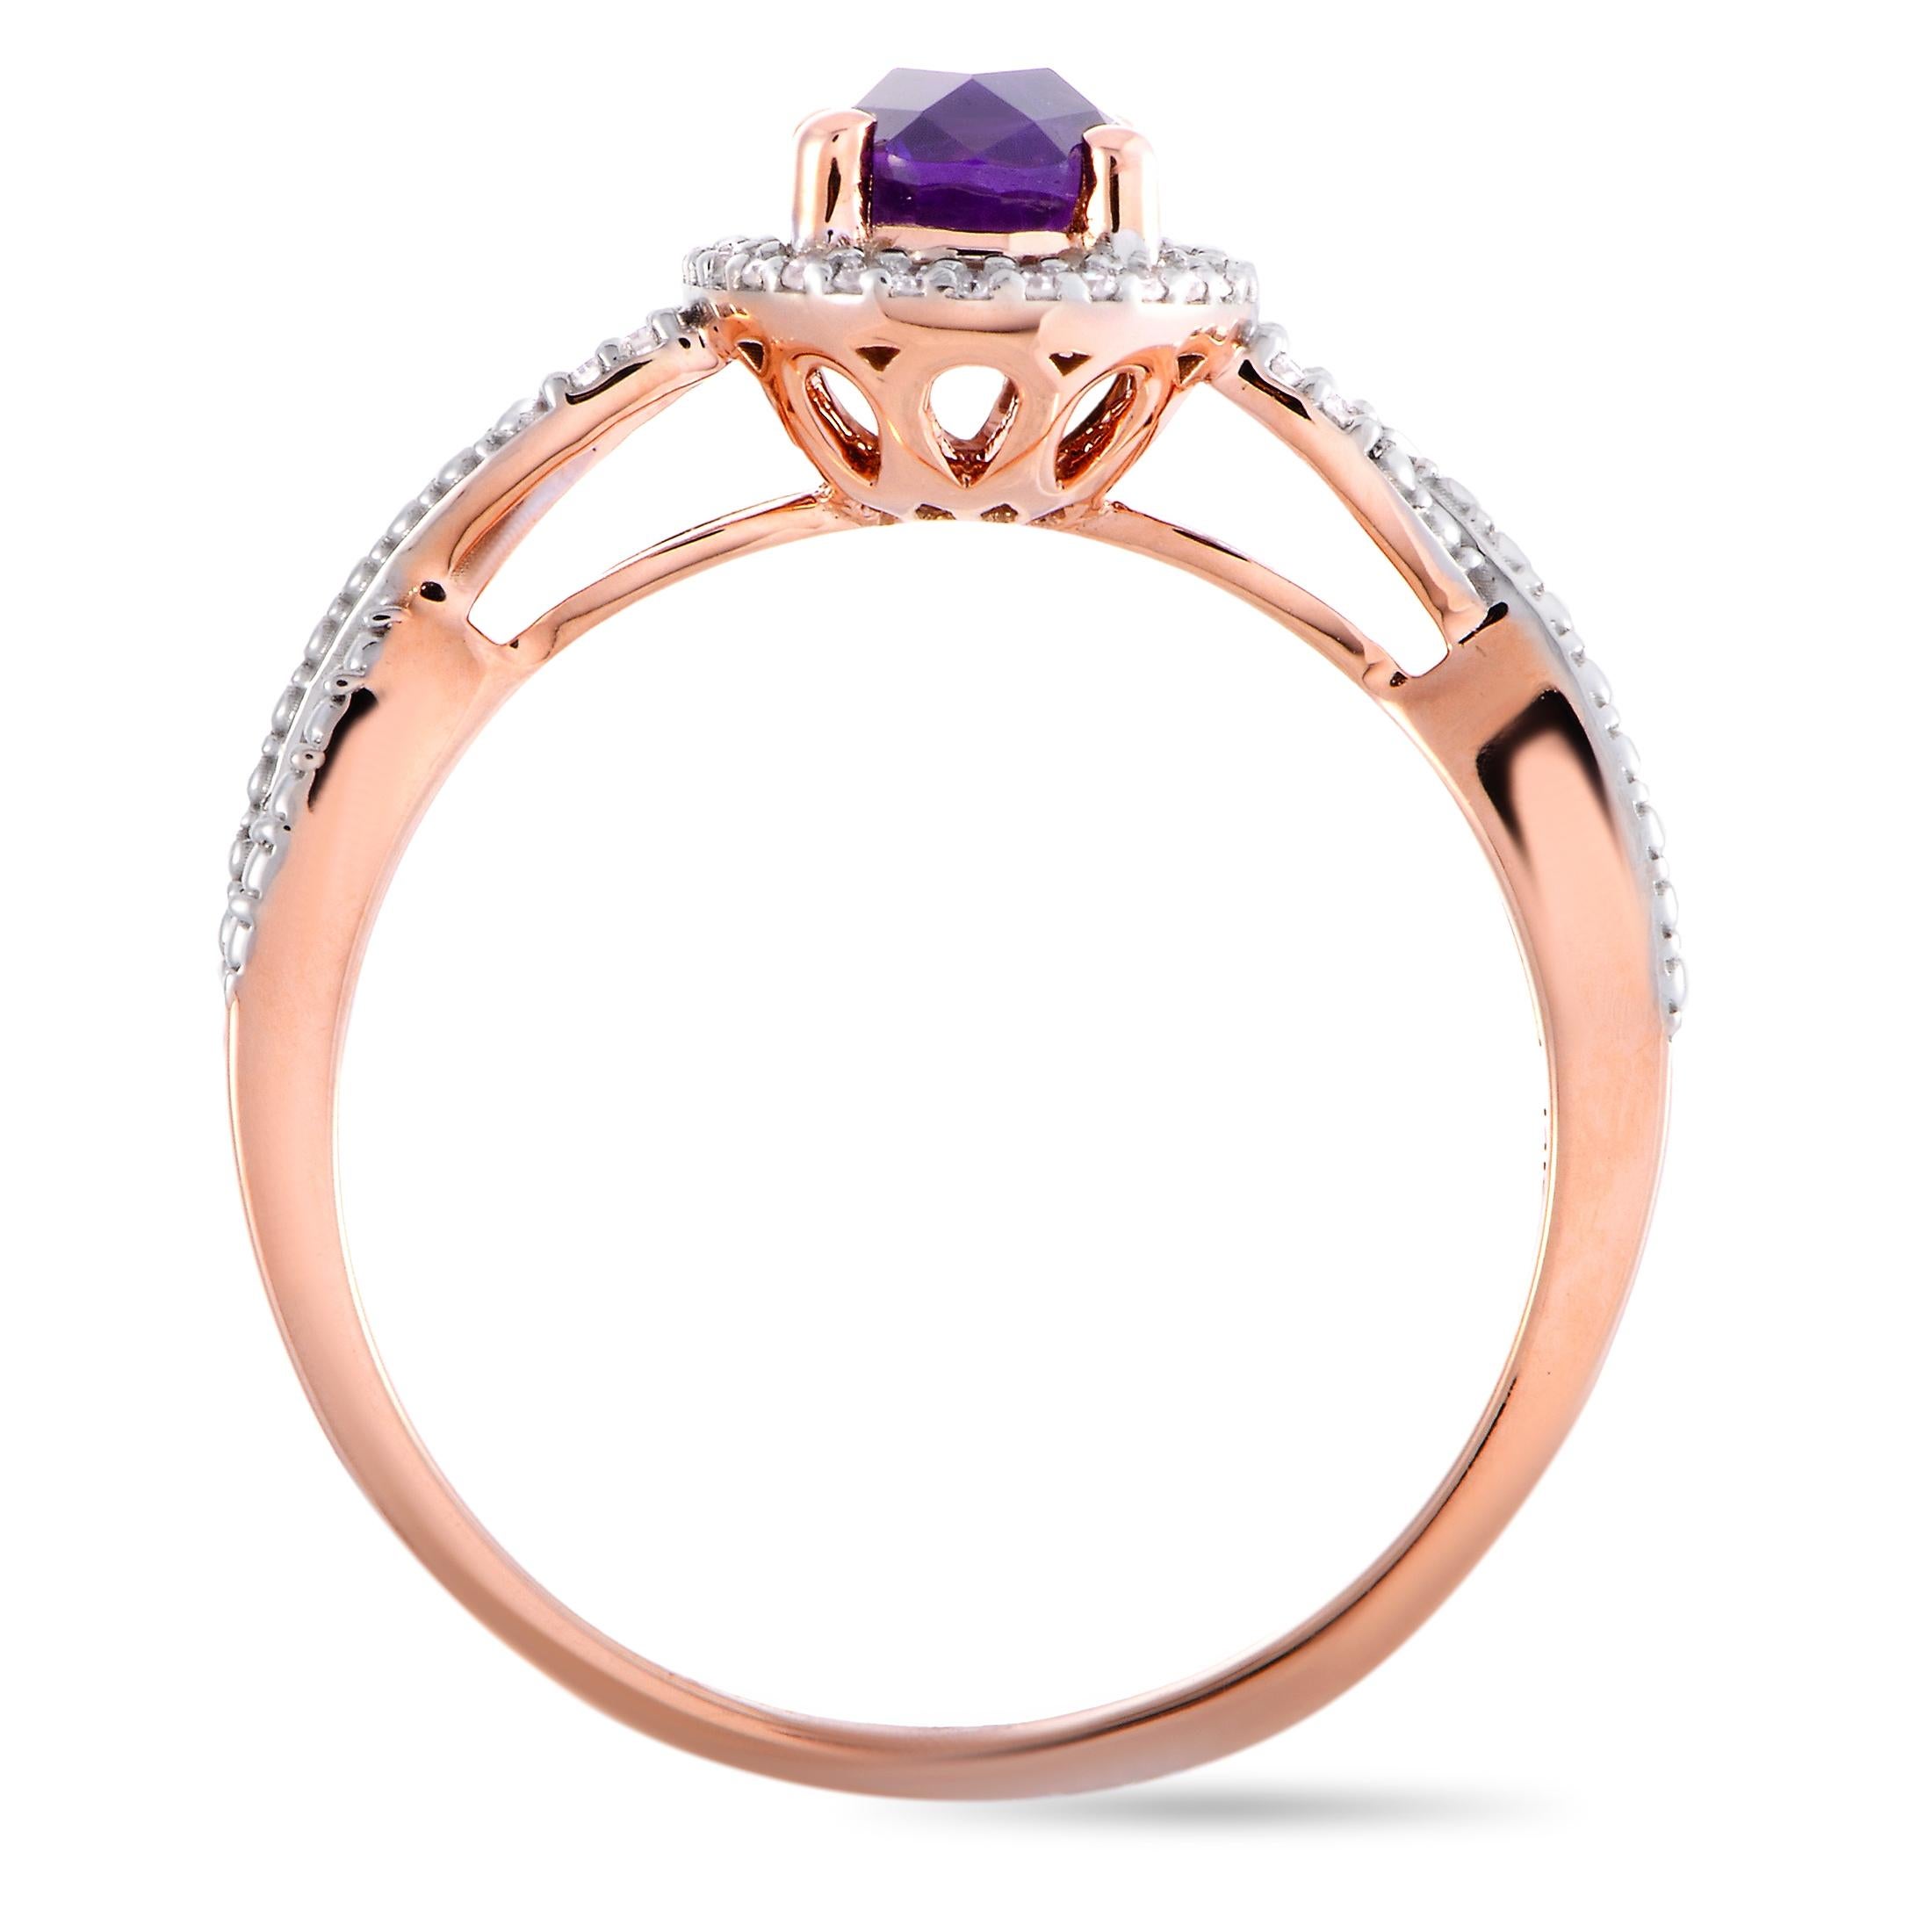 This ring is made of 14K rose gold and weighs 2.8 grams, boasting band thickness of 2 mm and top height of 6 mm, while top dimensions measure 10 by 8 mm. The ring is set with an amethyst and a total of 0.10 carats of diamonds.
 
 Offered in brand